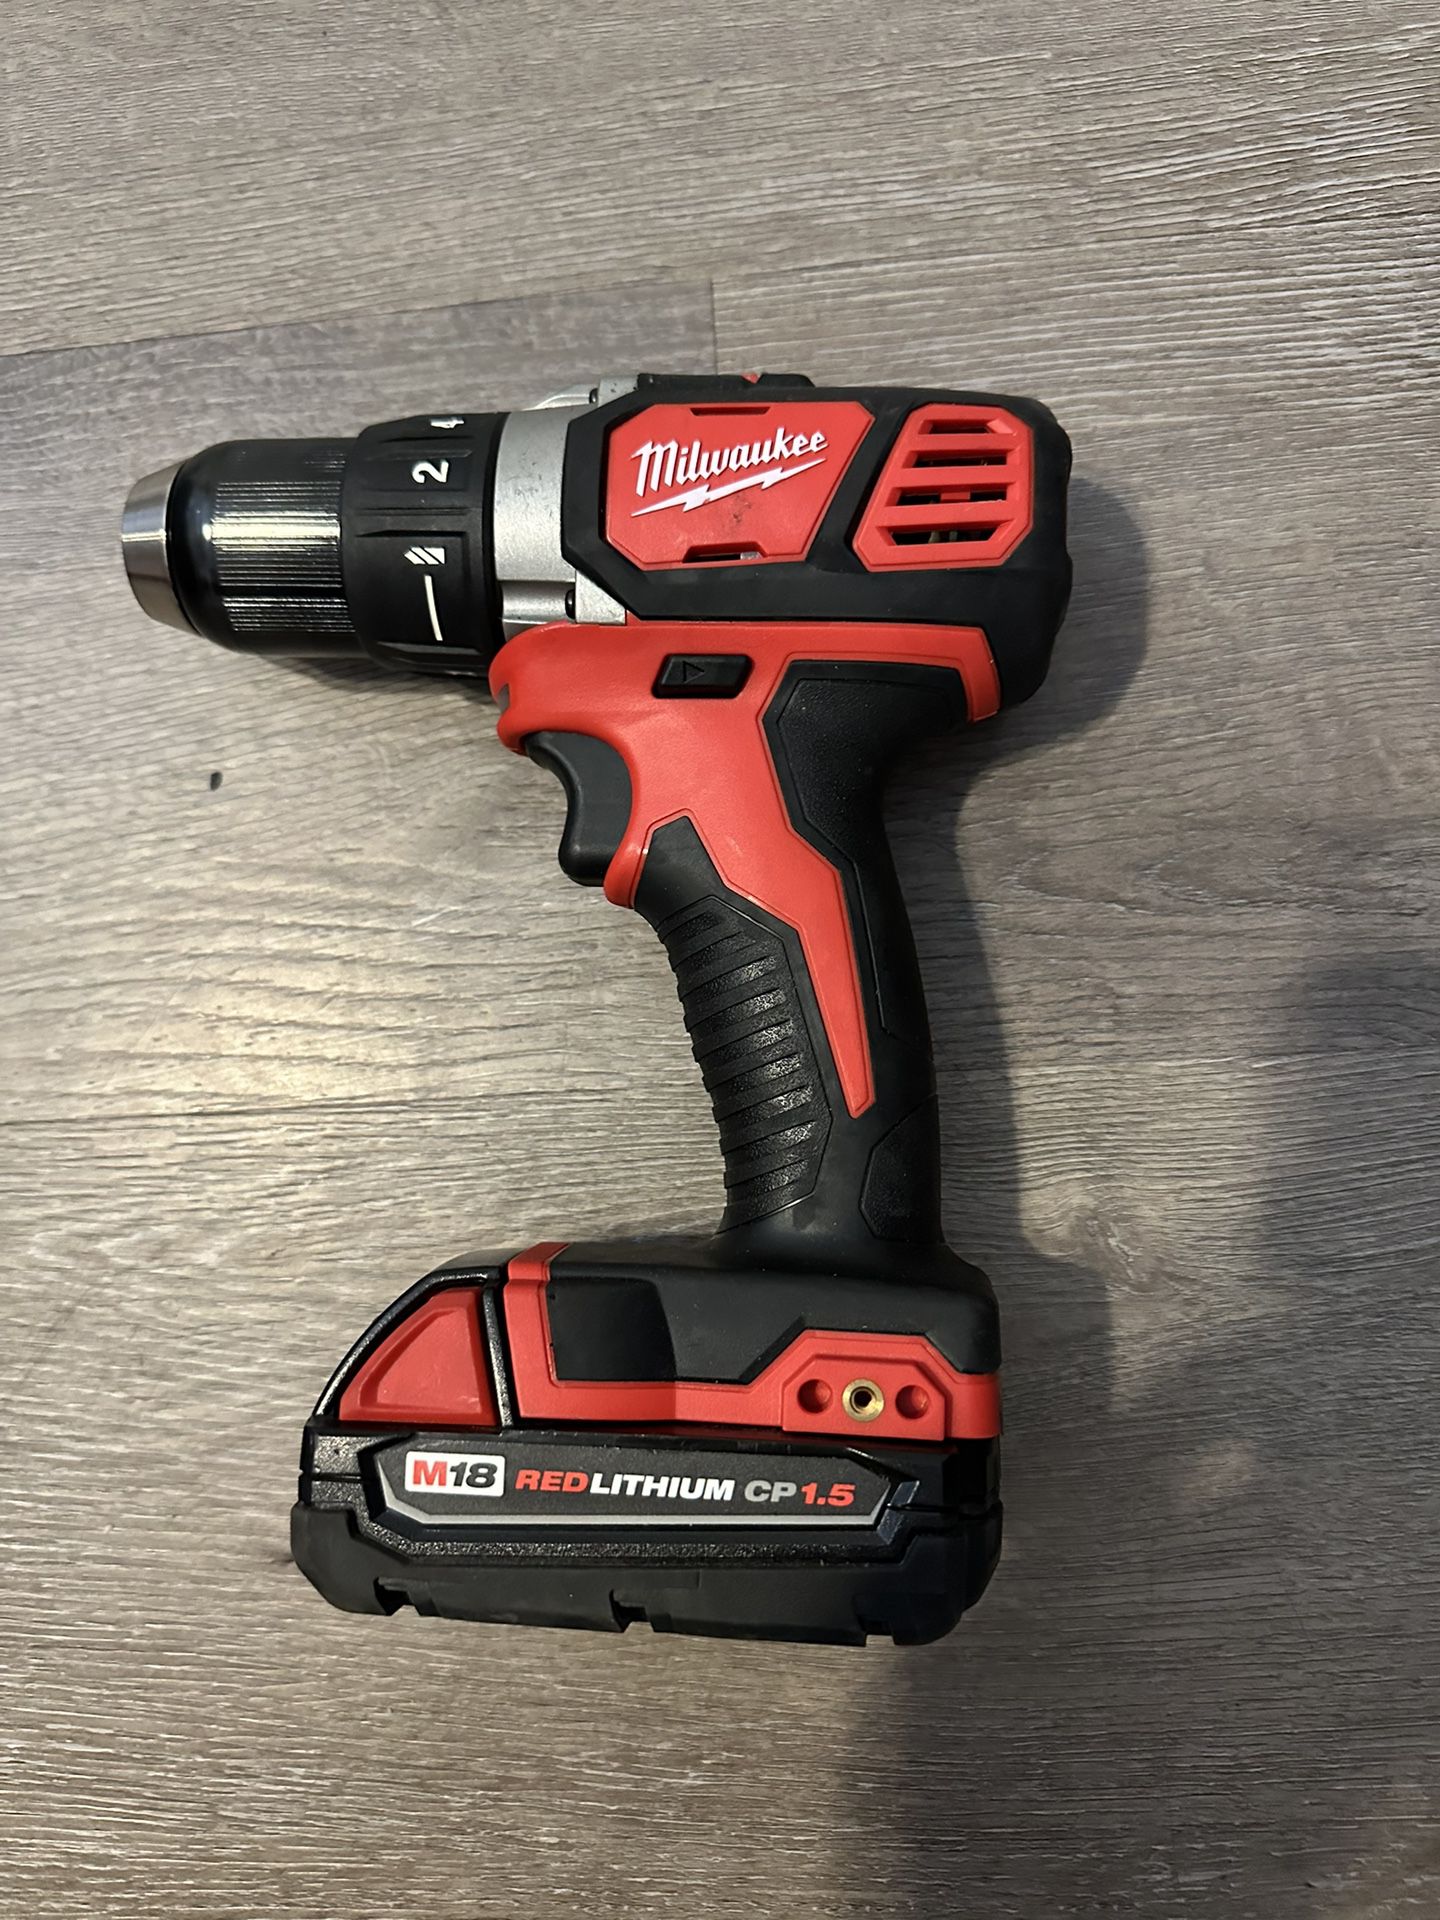 Power Drill With Battery 